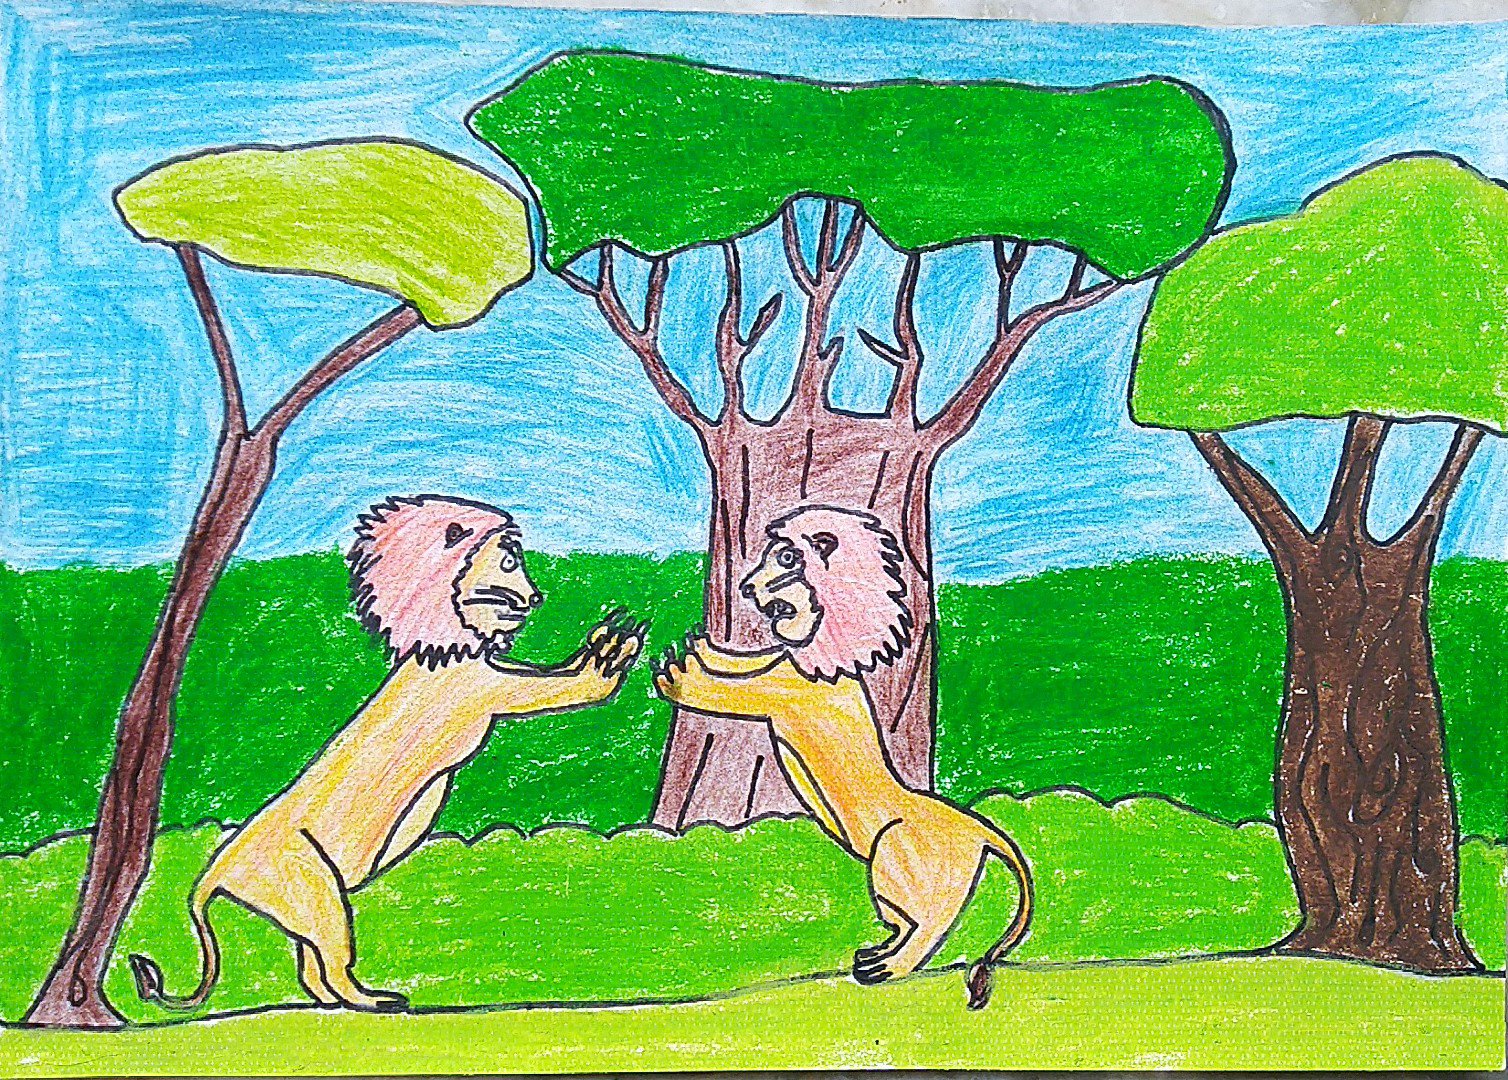 TWO LION FIGHTING FOR SUPREMACY FOR THE AREA - JOHN ( JOHN ART Gallery 2019).